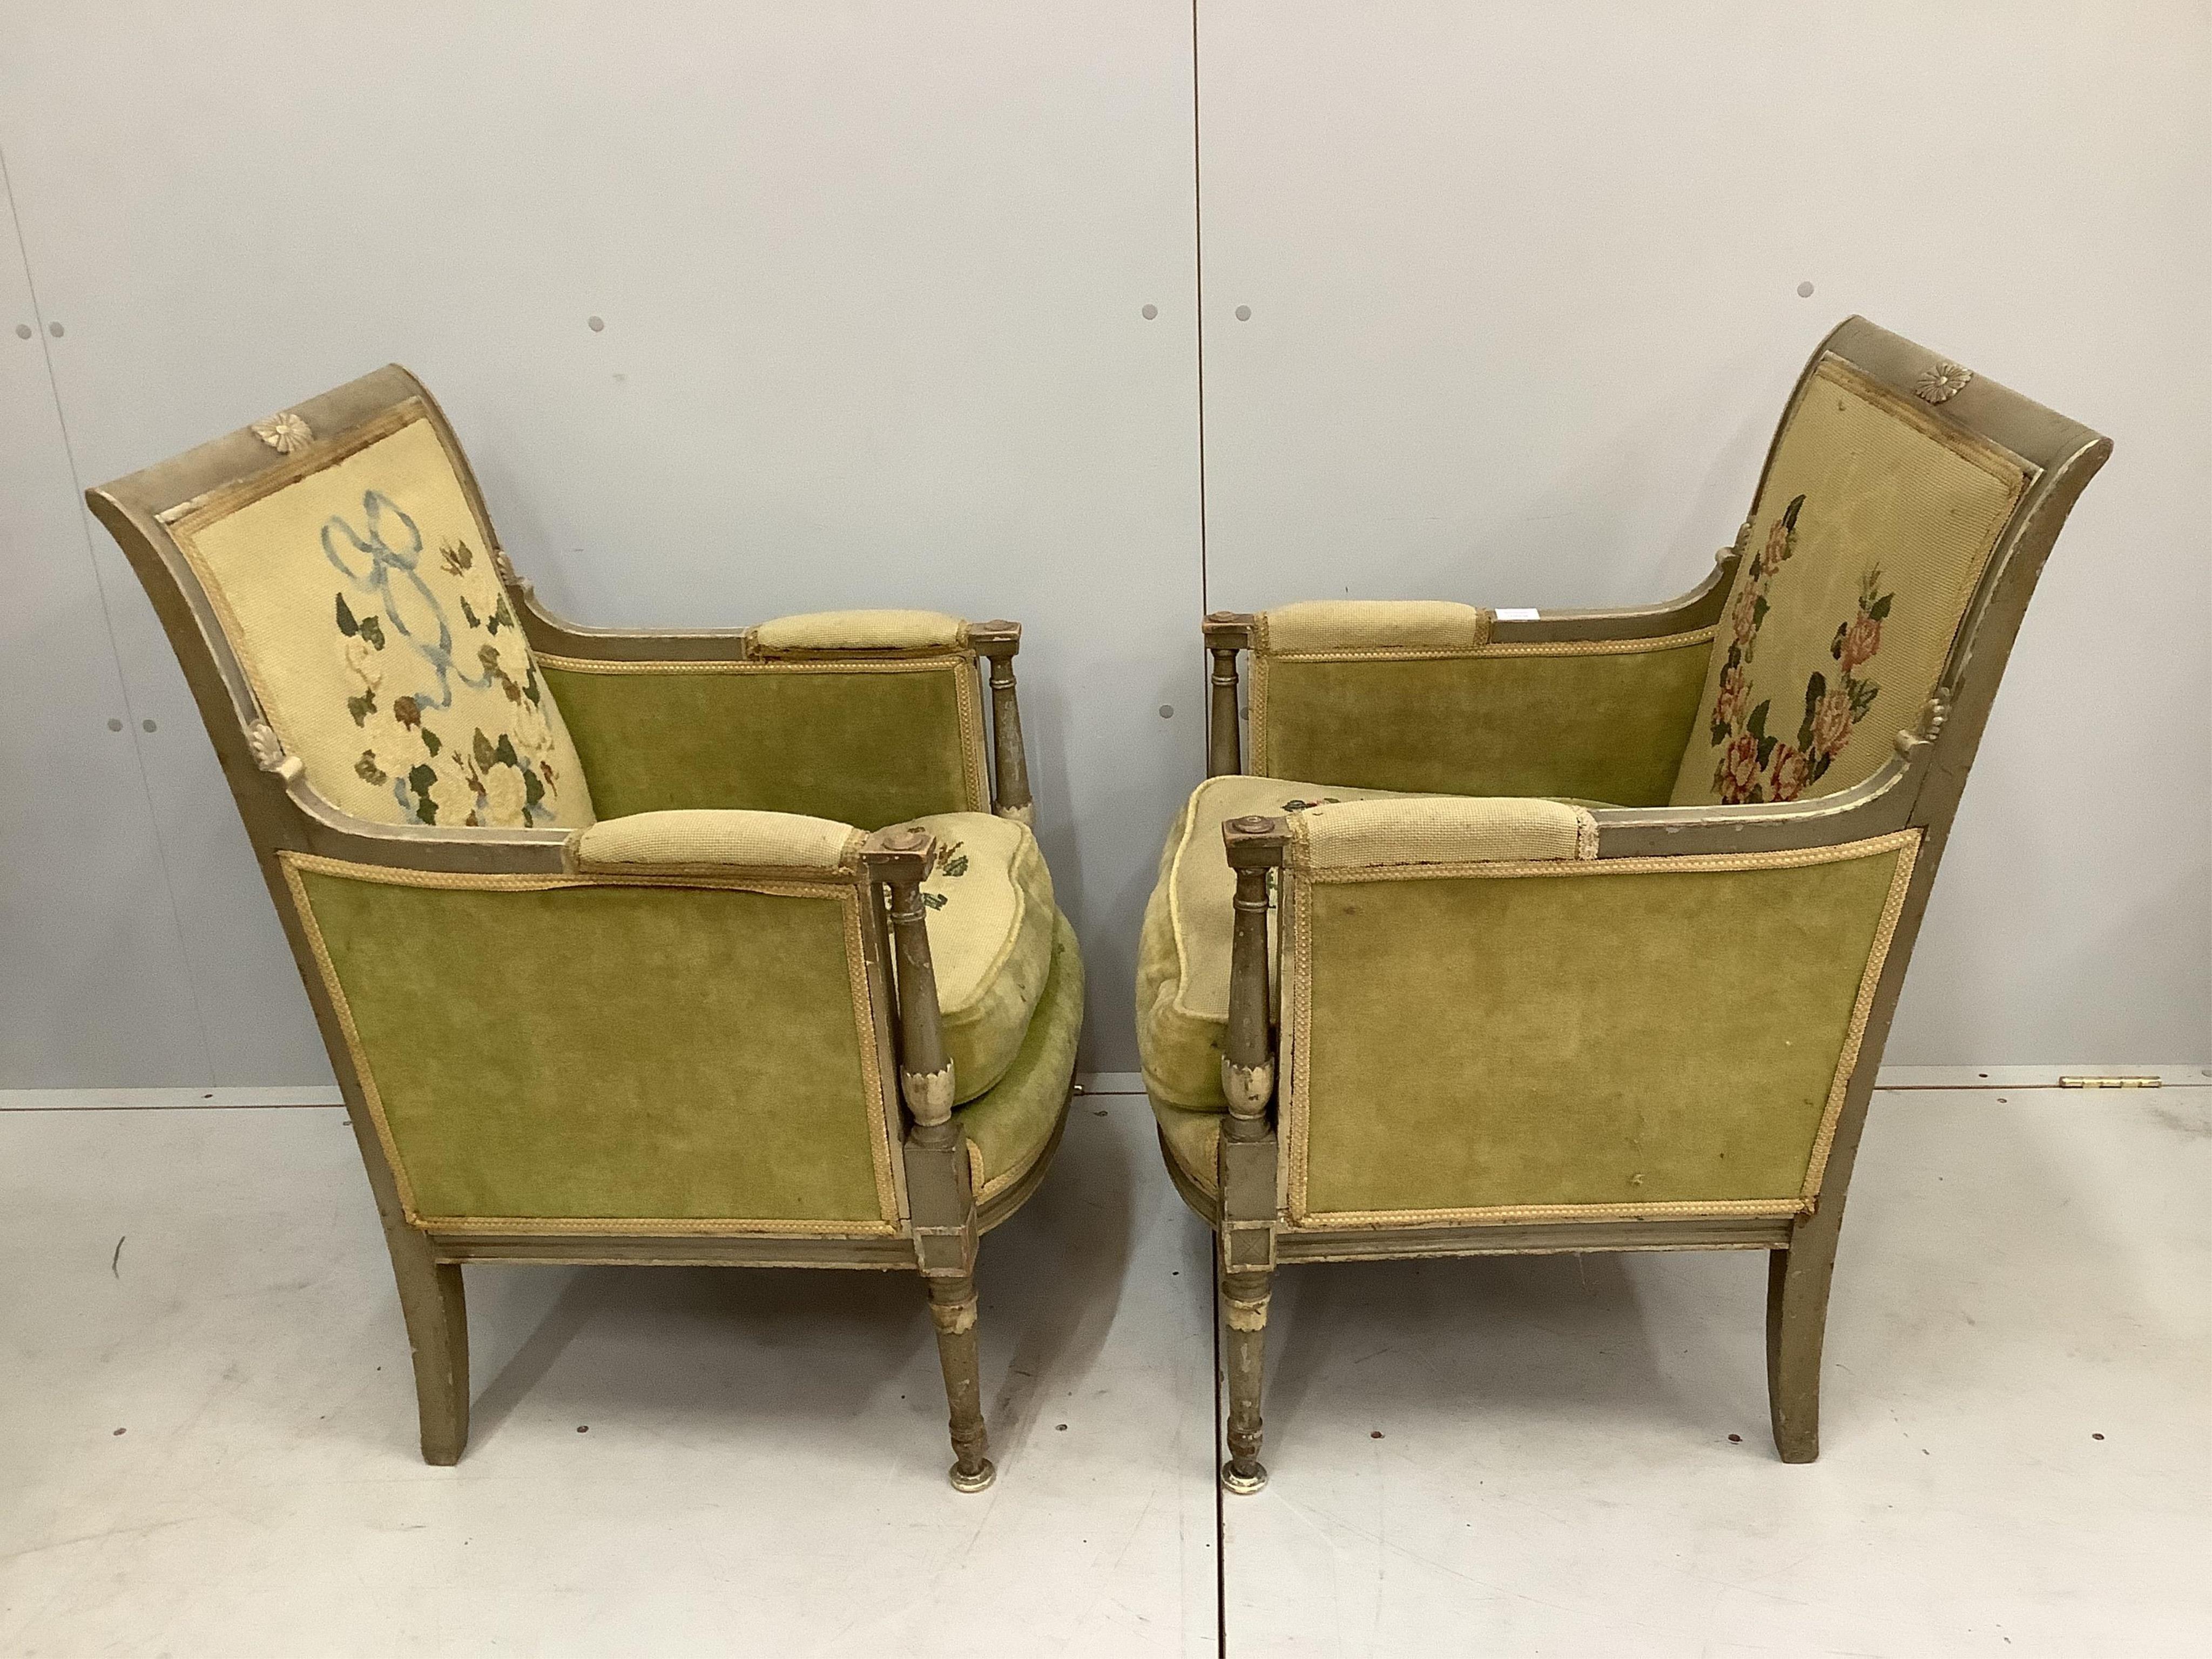 A pair of 19th century French chairs, width 60cm, depth 60cm, height 88cm. Condition - fair